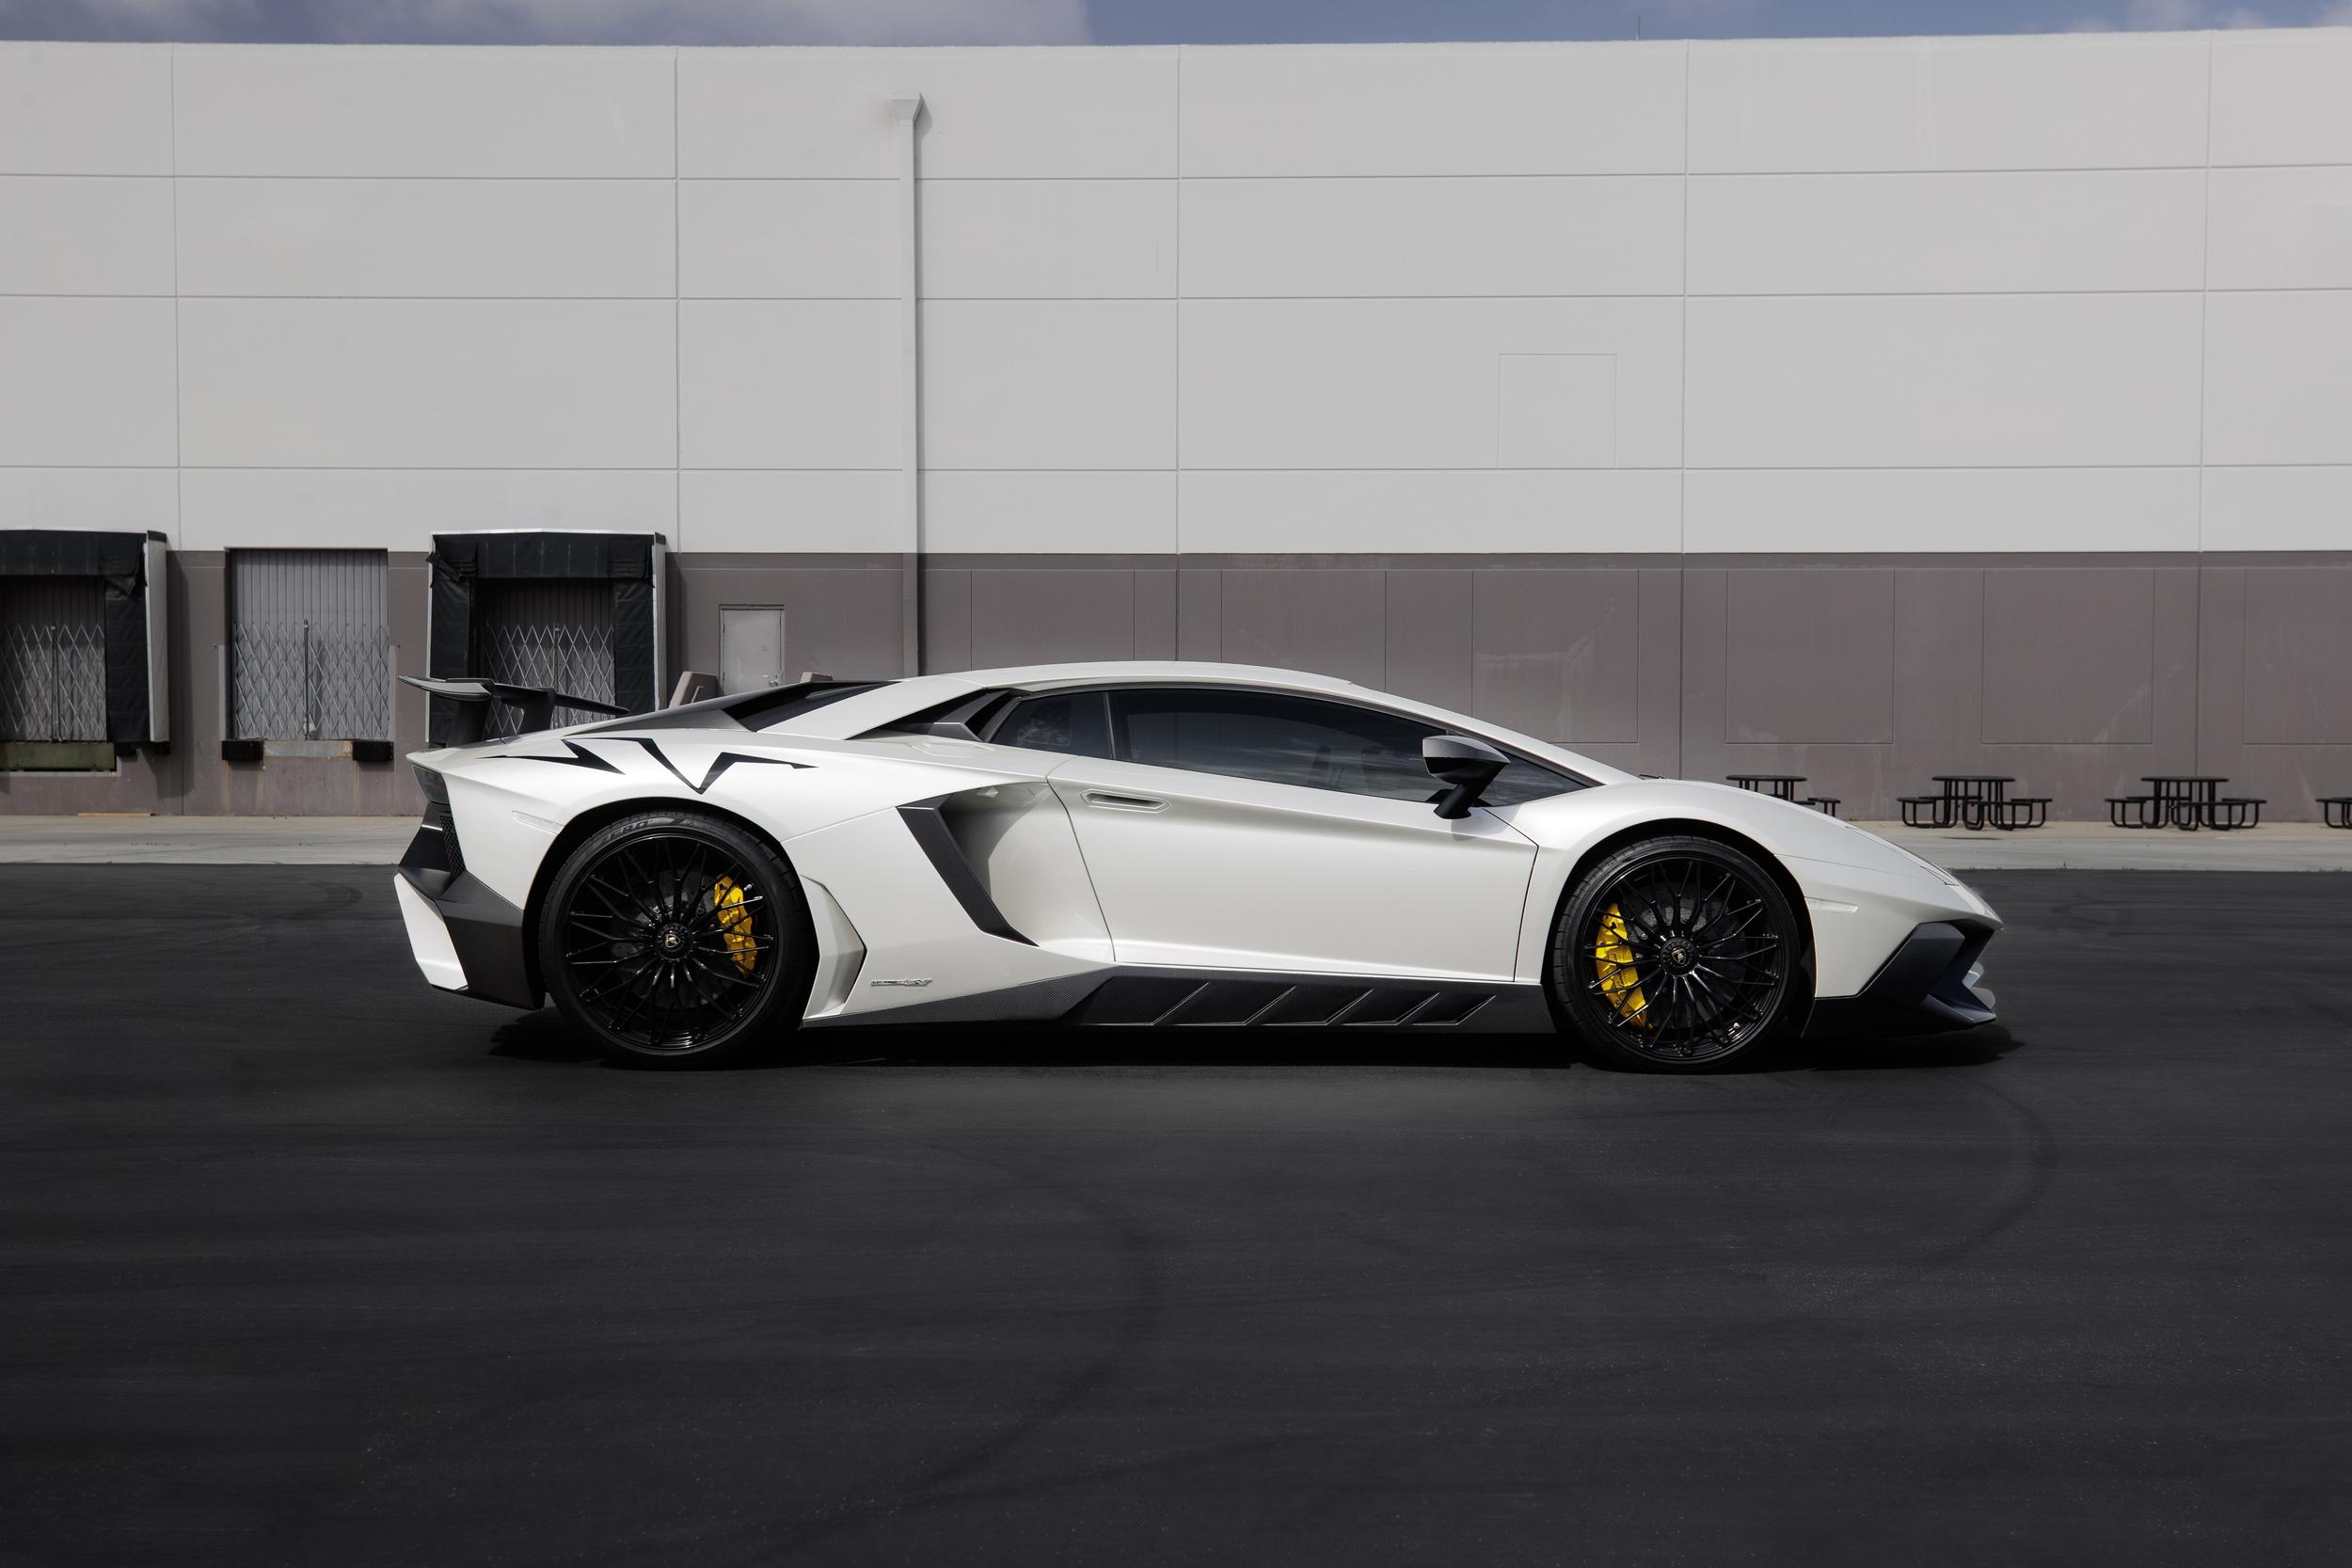 Why is a lamborghini oil change expensive?